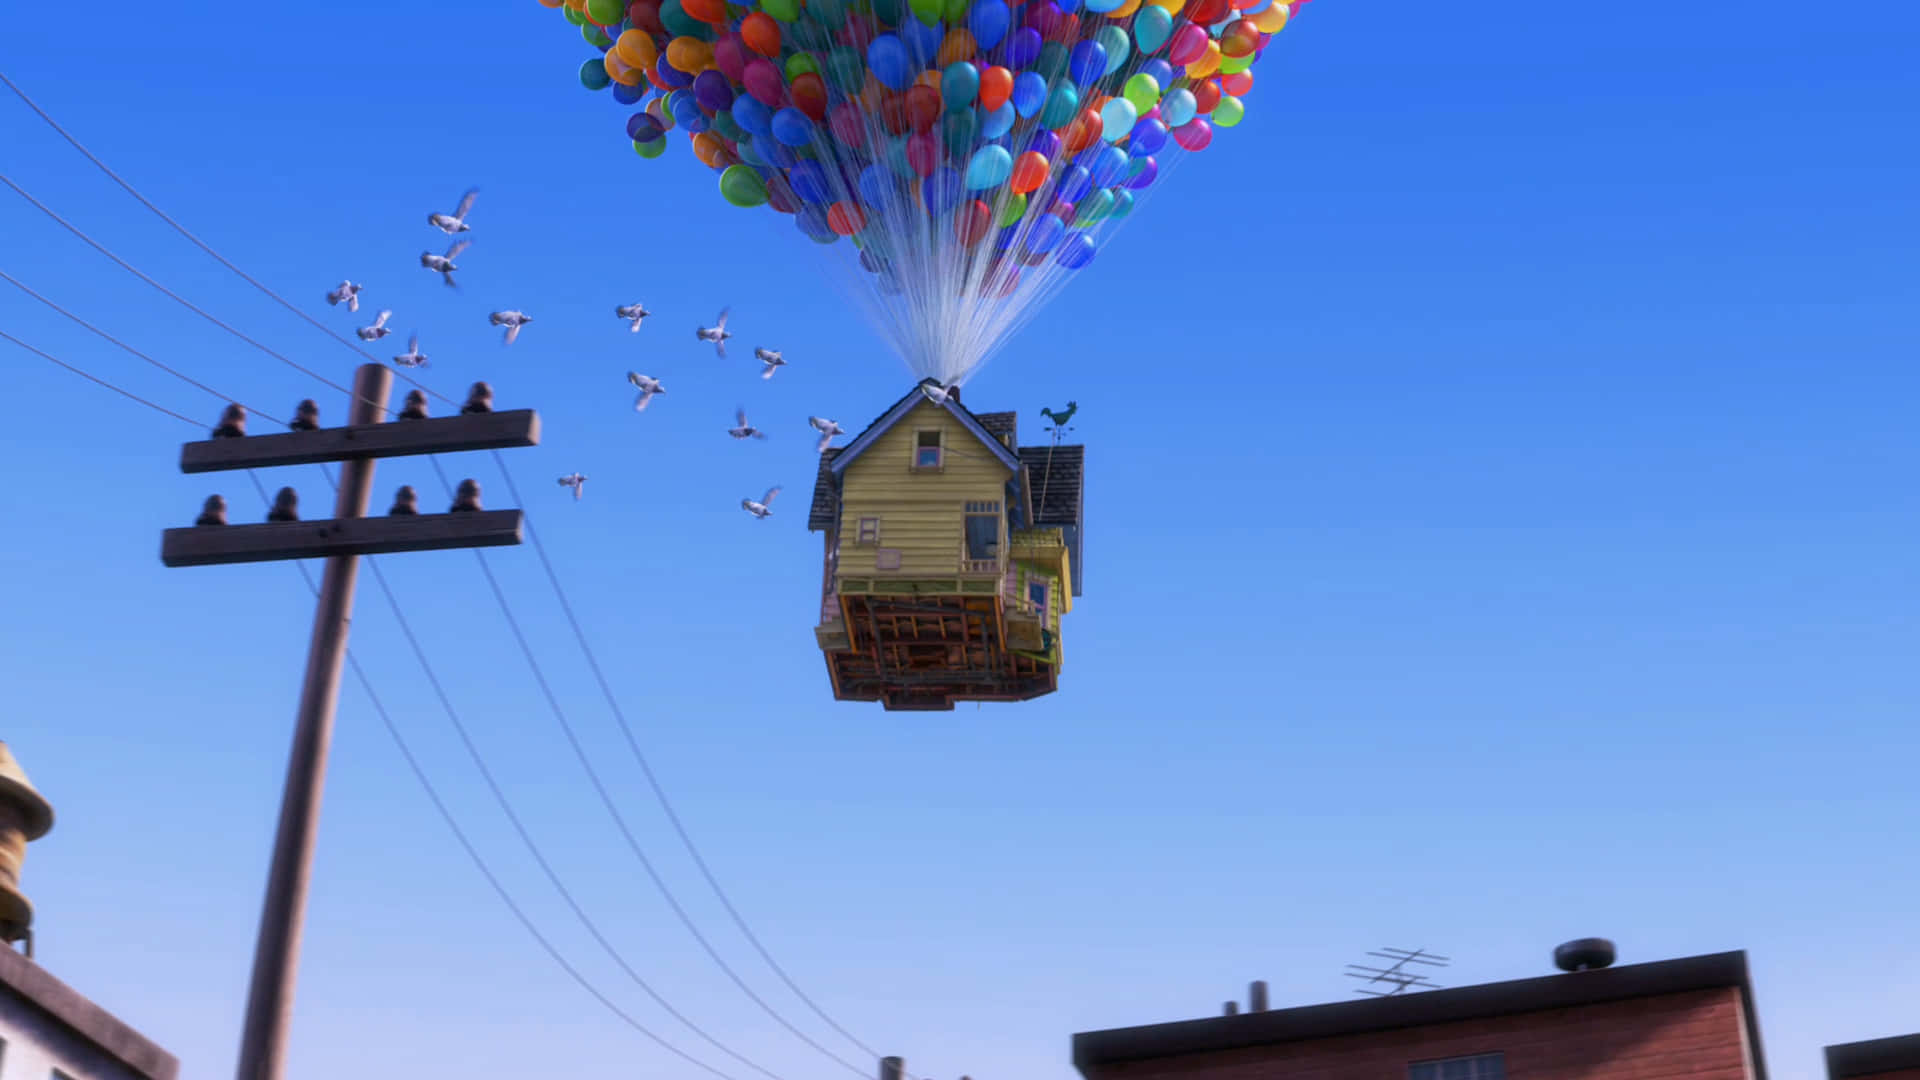 Up - A House With Balloons Flying Over It